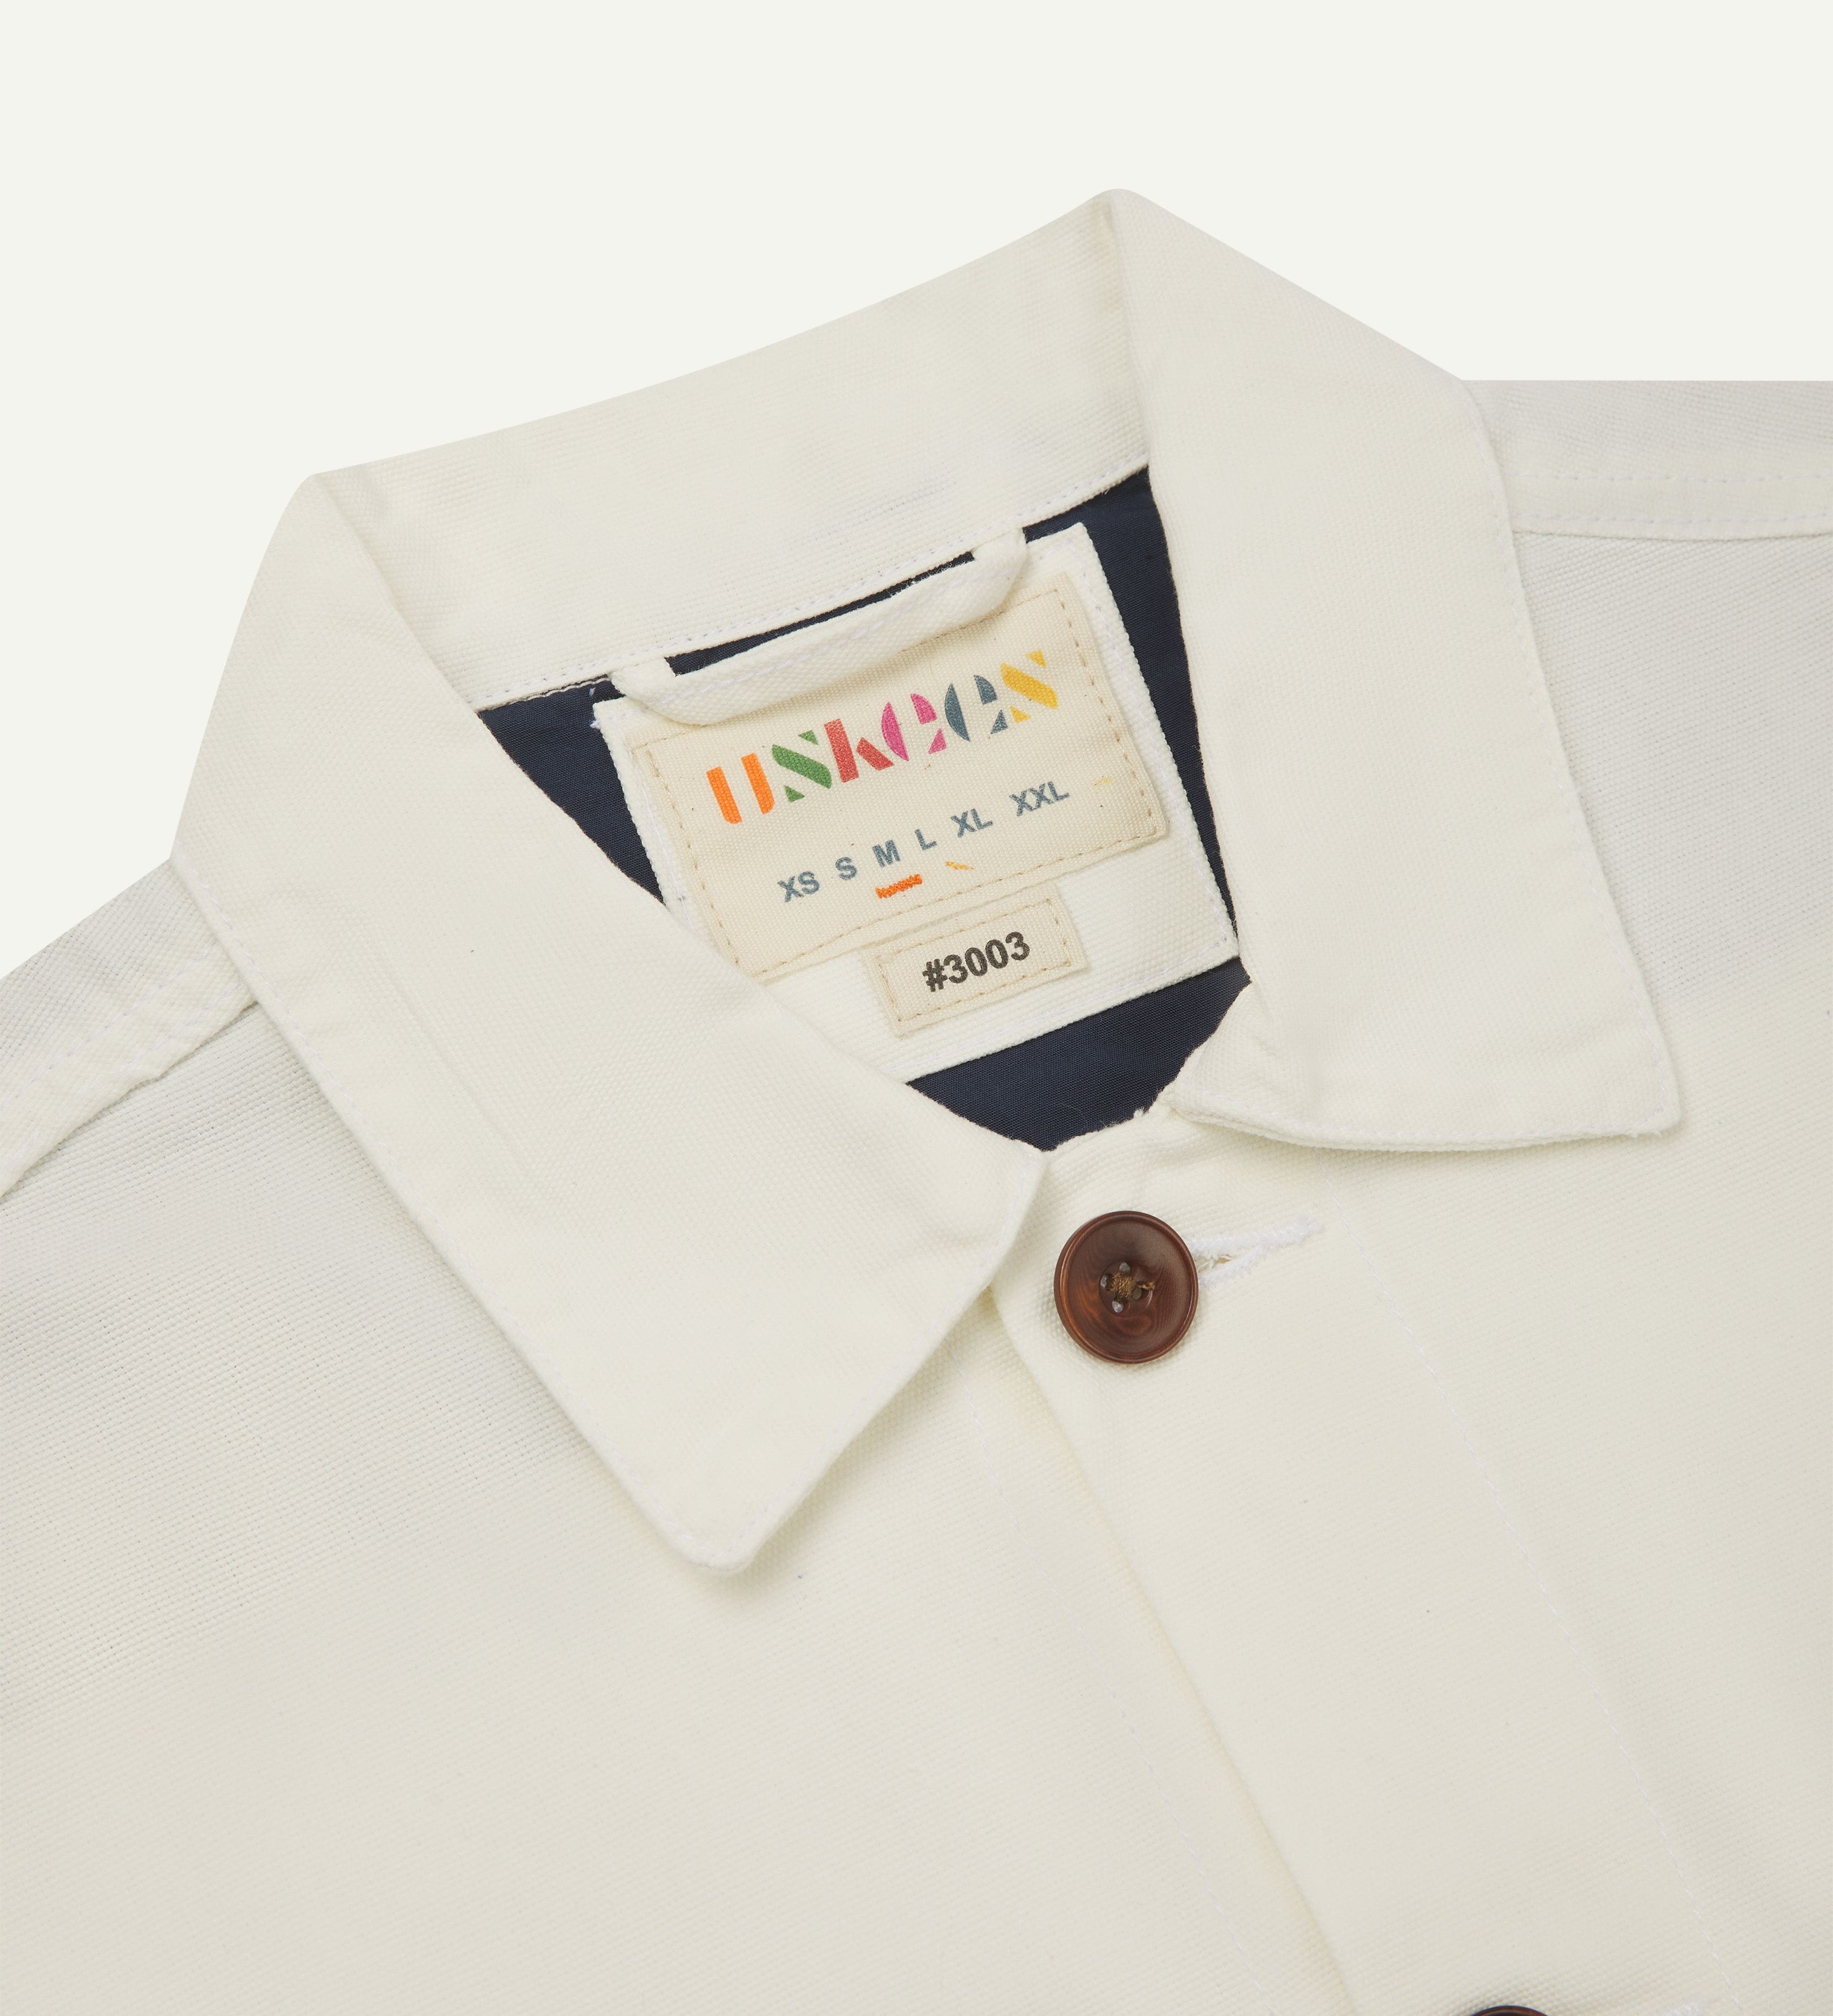 Front close-up view of cream buttoned 3003 workshirt from Uskees. Showing brand label, navy yoke lining and brown corozo buttons